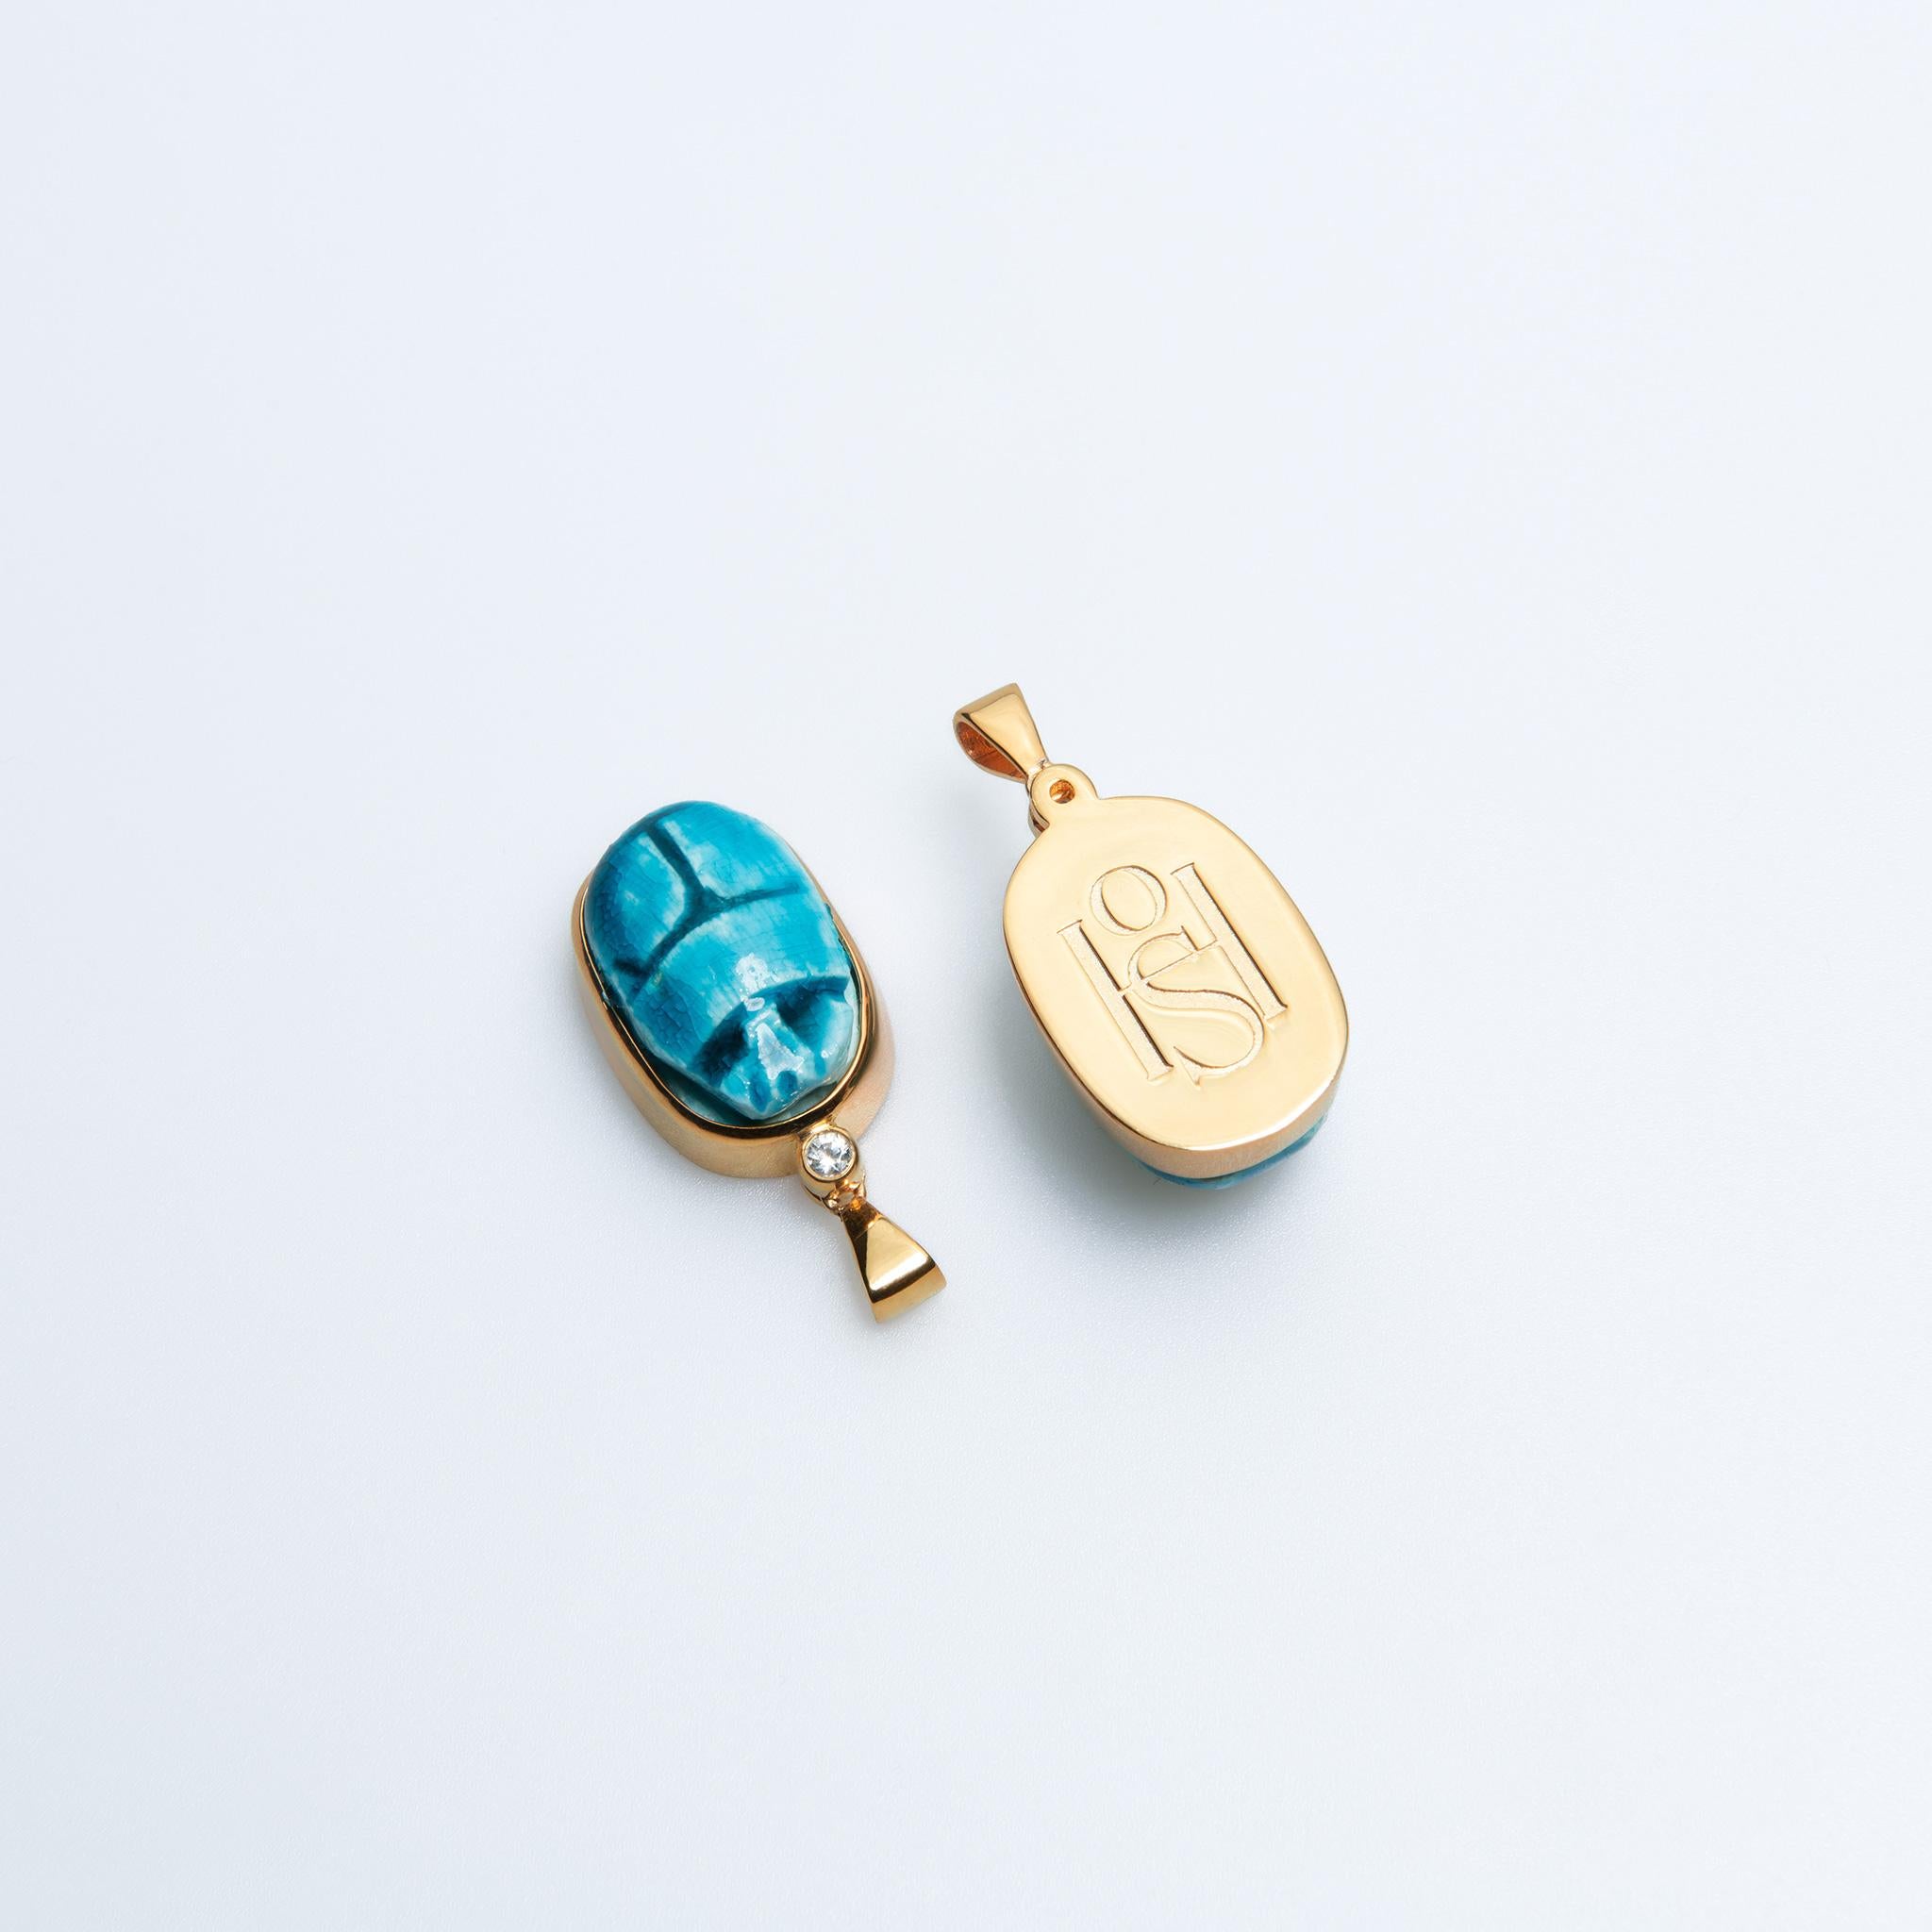 House of Sol Gold filled Silver Scarab Charm with Sapphire In New Condition For Sale In Sarasota, FL